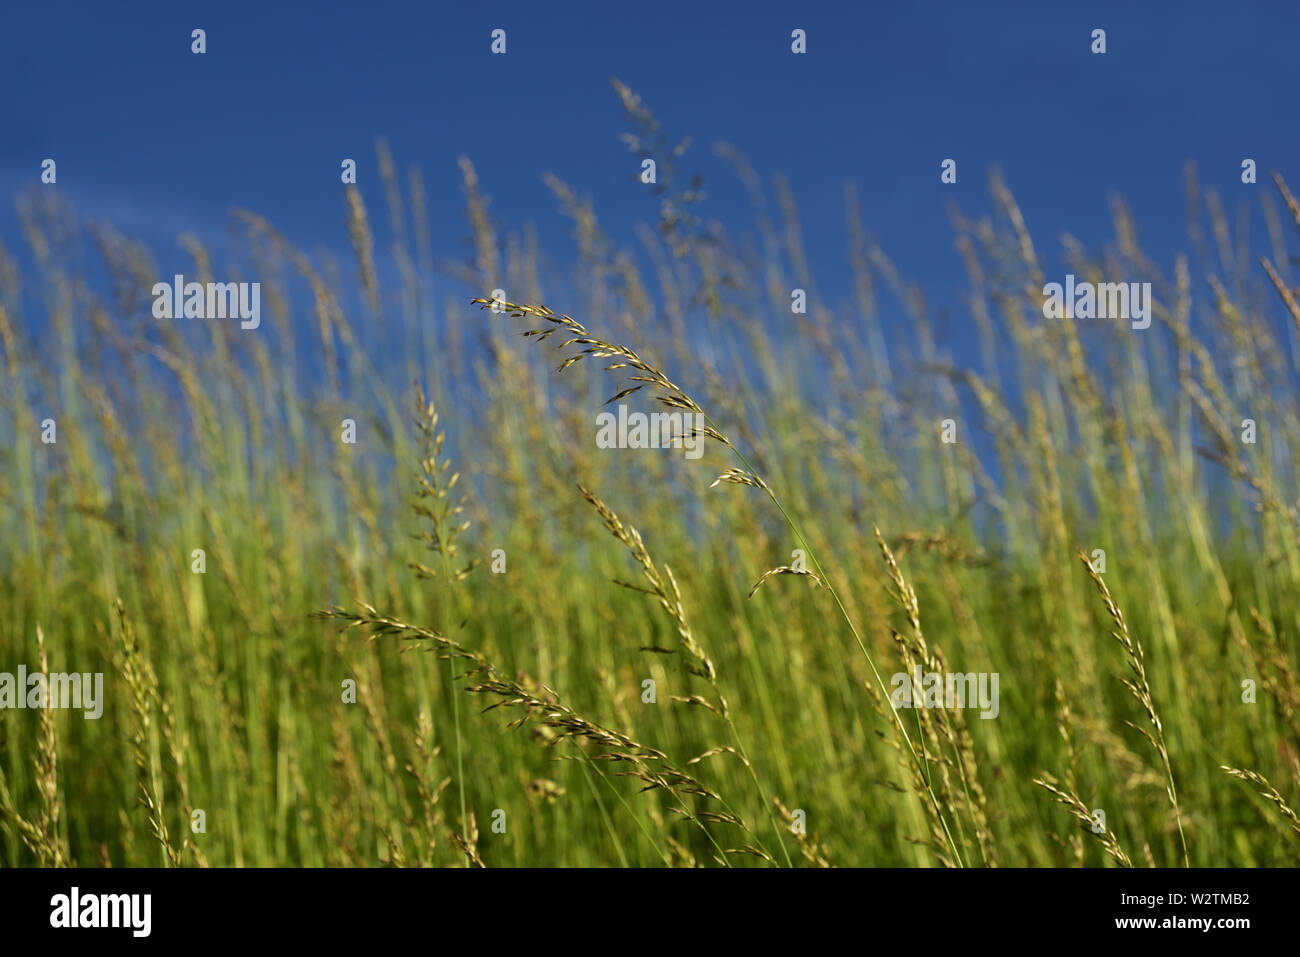 Green fresh grass in front of blue sky in summer Stock Photo